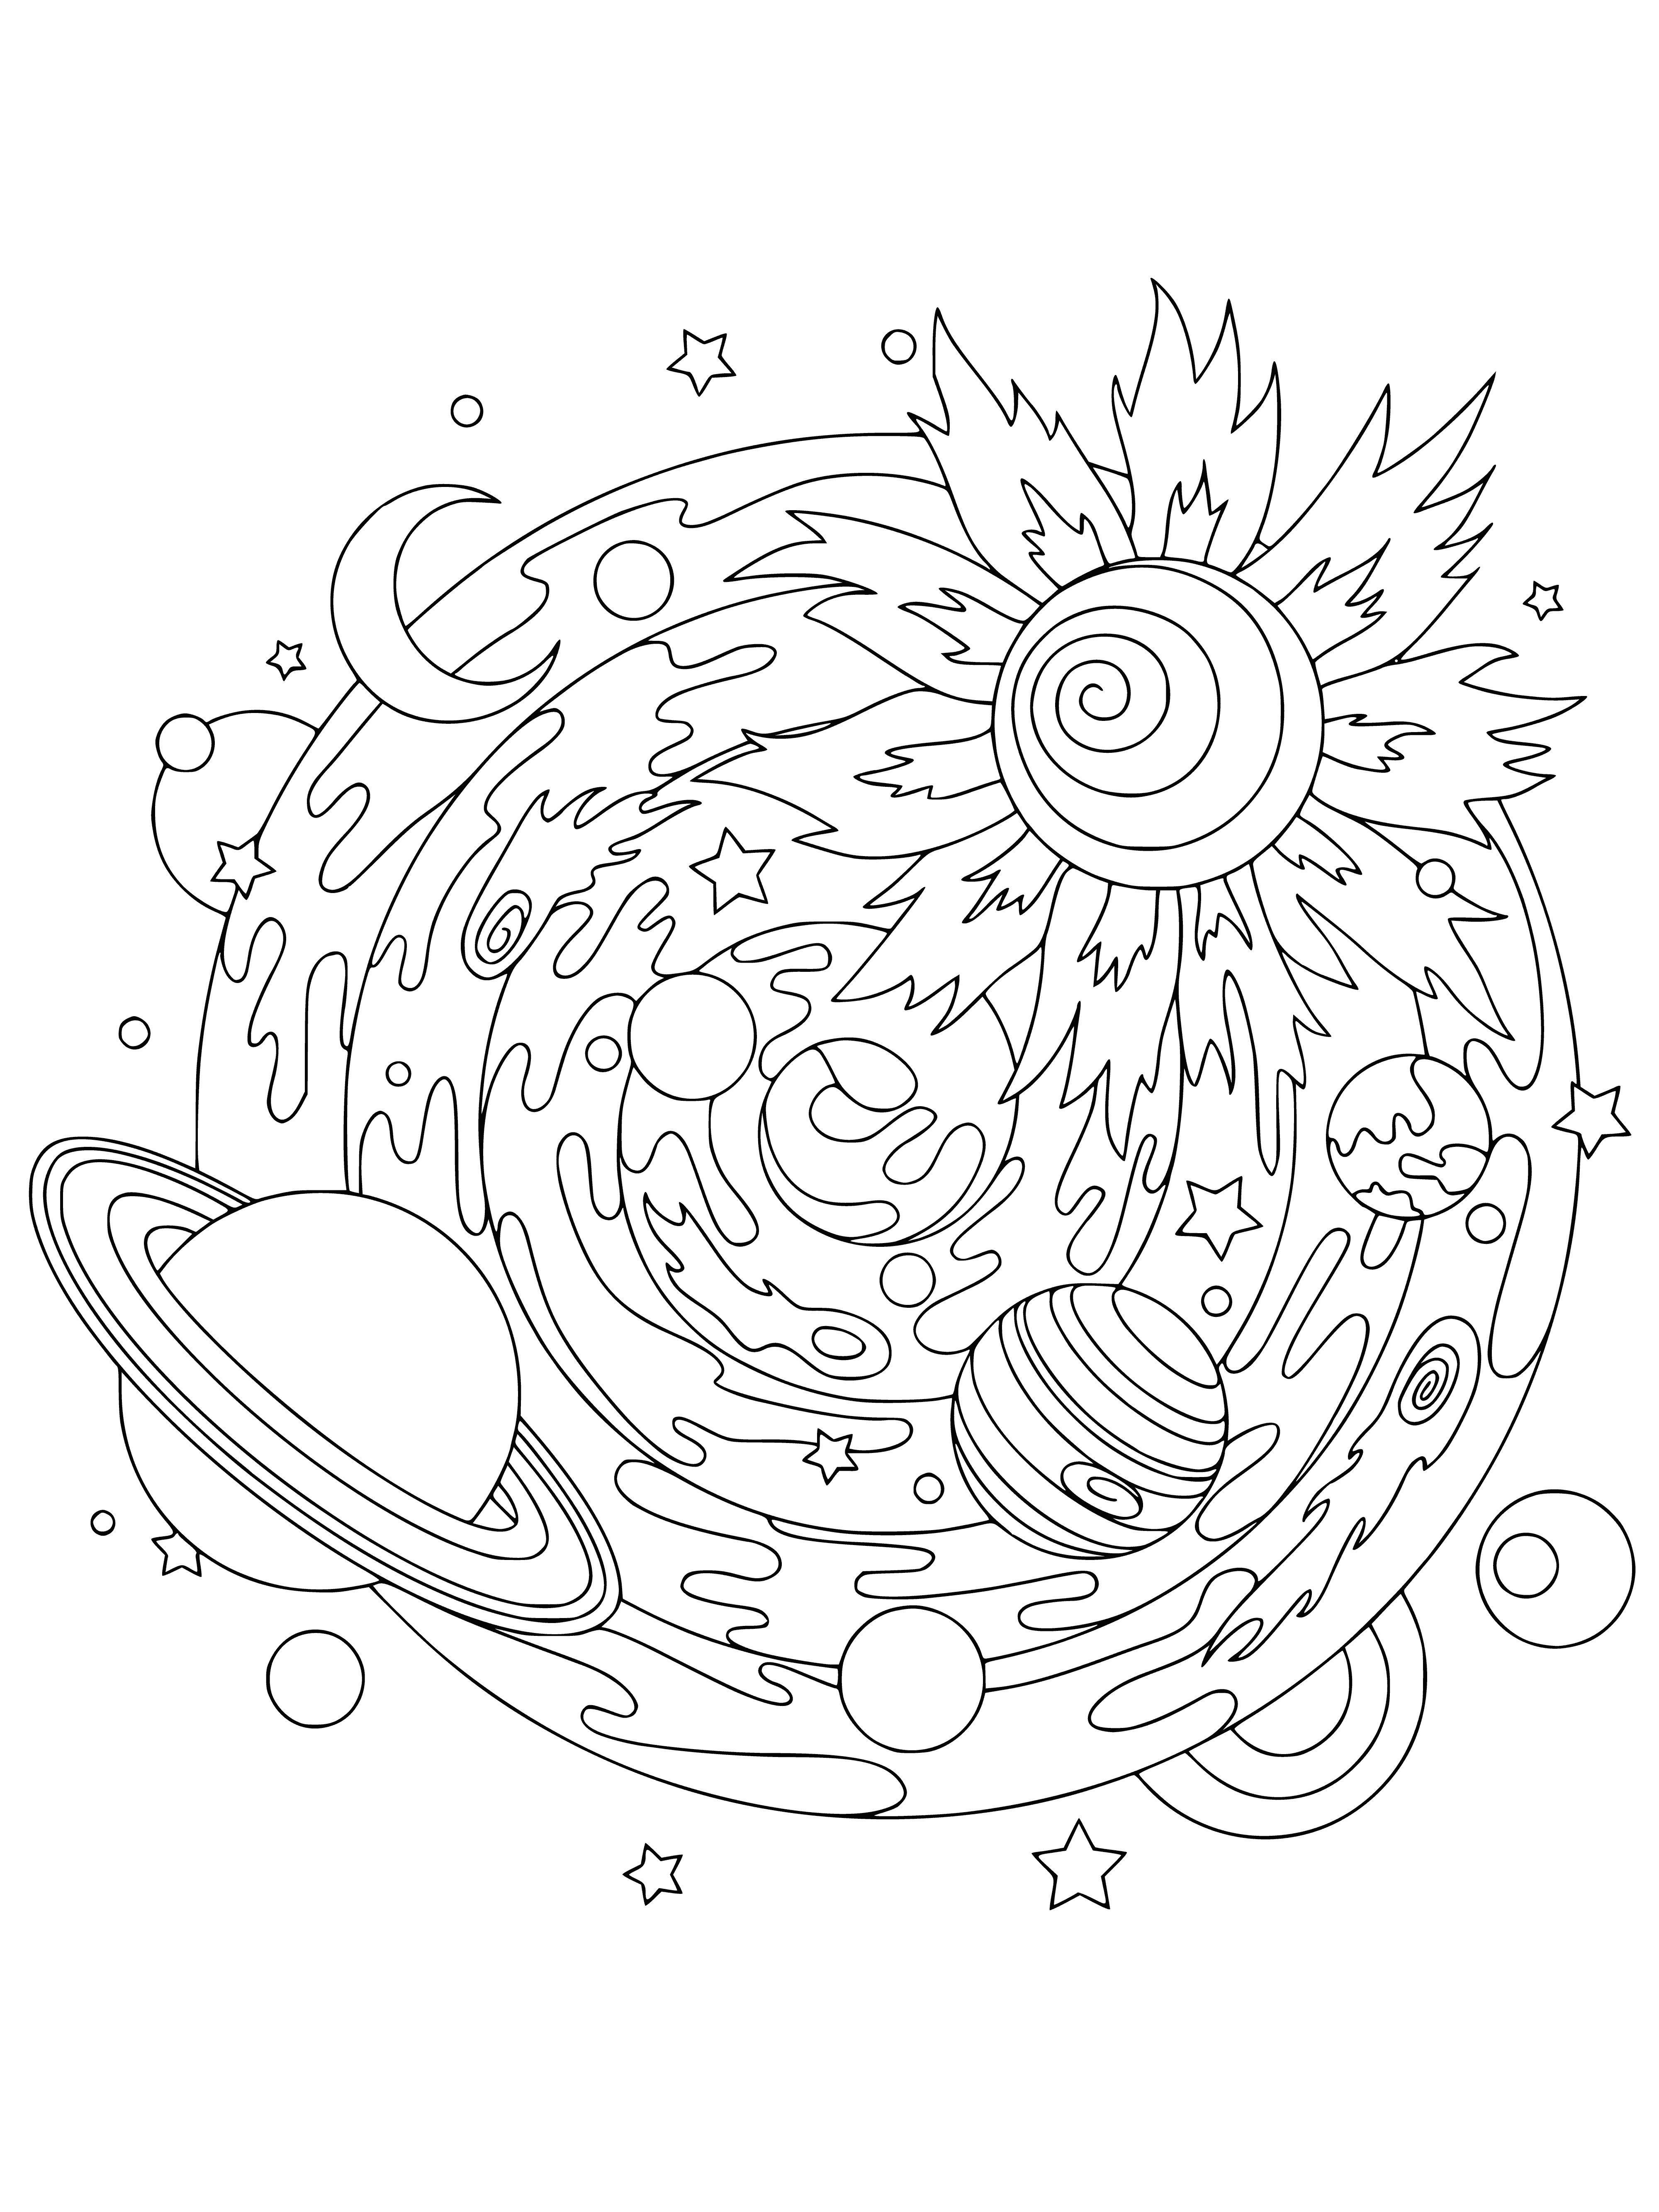 coloring page: Coloring book features solar system pages with planets & stars in different colors & patterns. #antistressspace #coloringbook #arttherapy